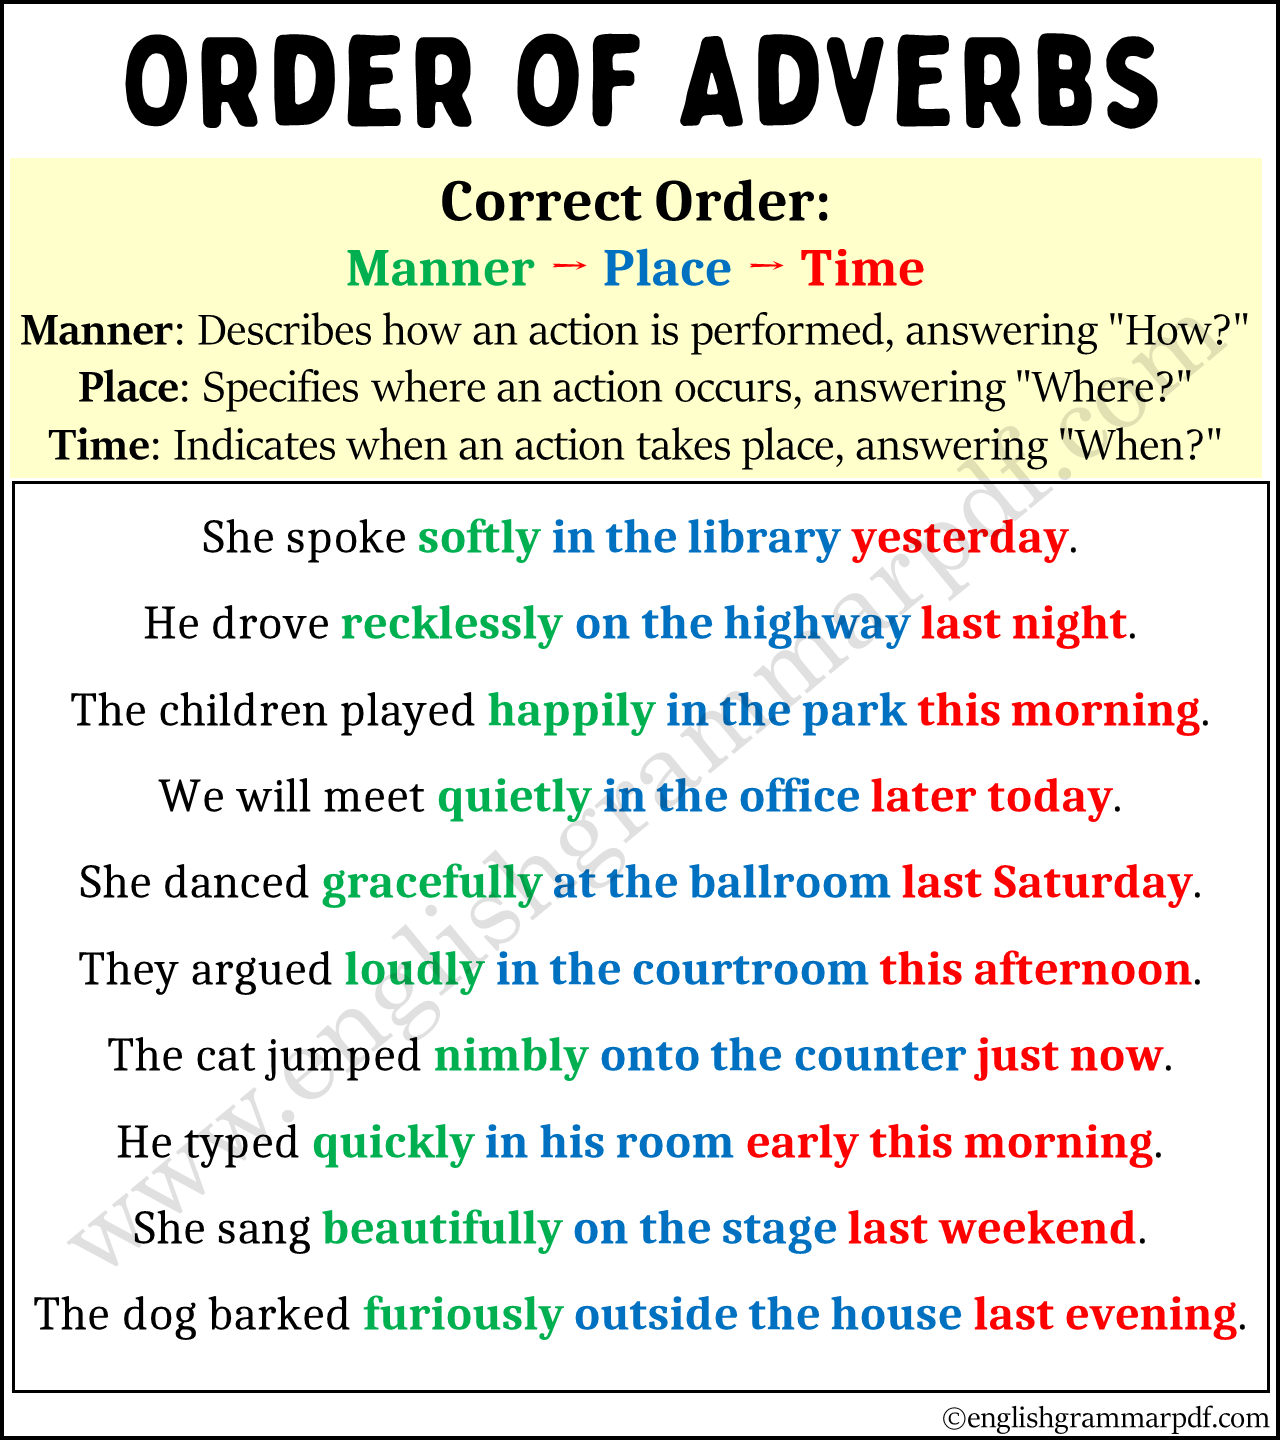 Order of Adverbs